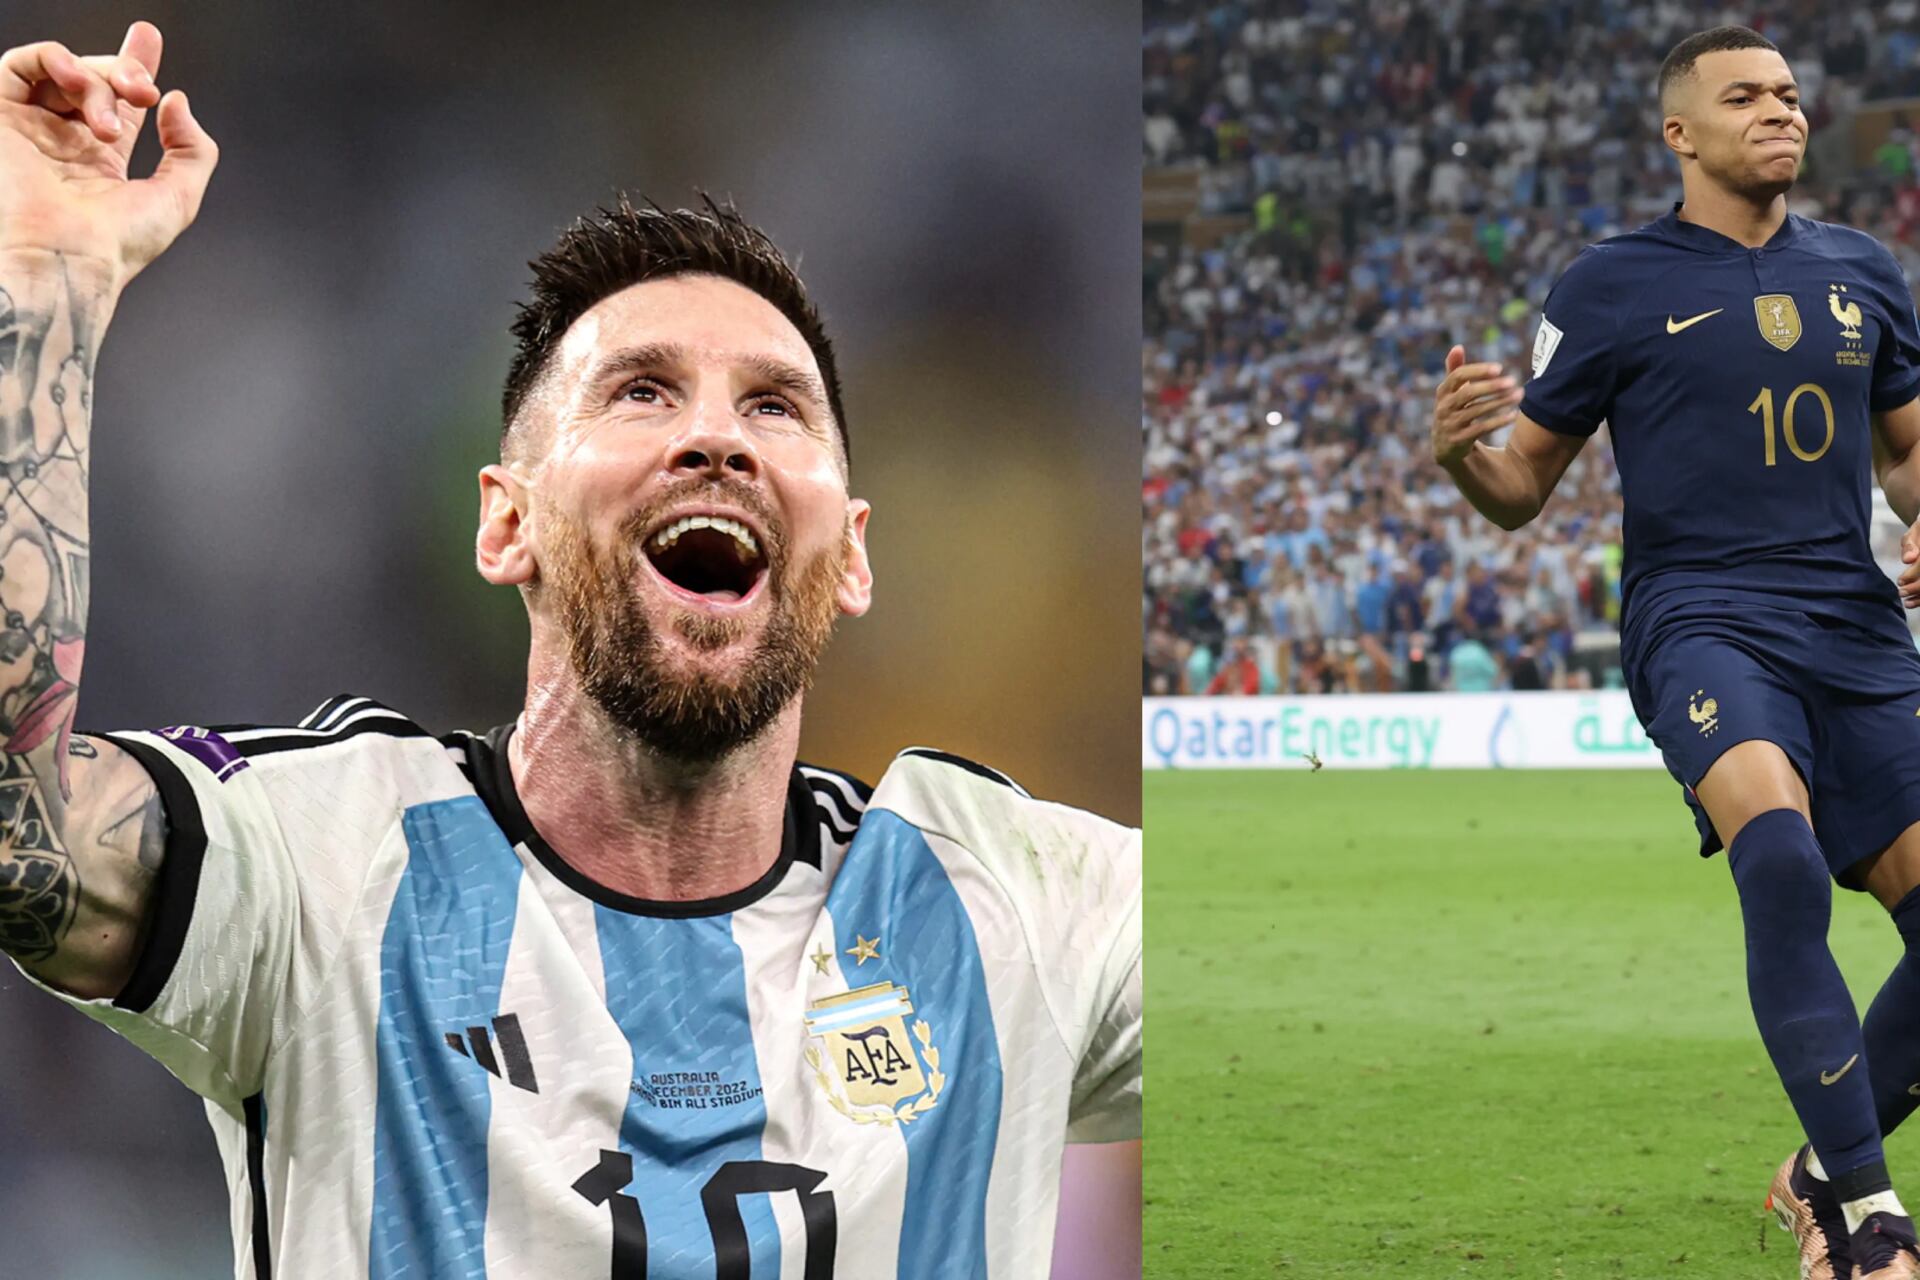 Messi vs Mbappé? Lionel's teammate reminds Kylian's teammate about World Cup